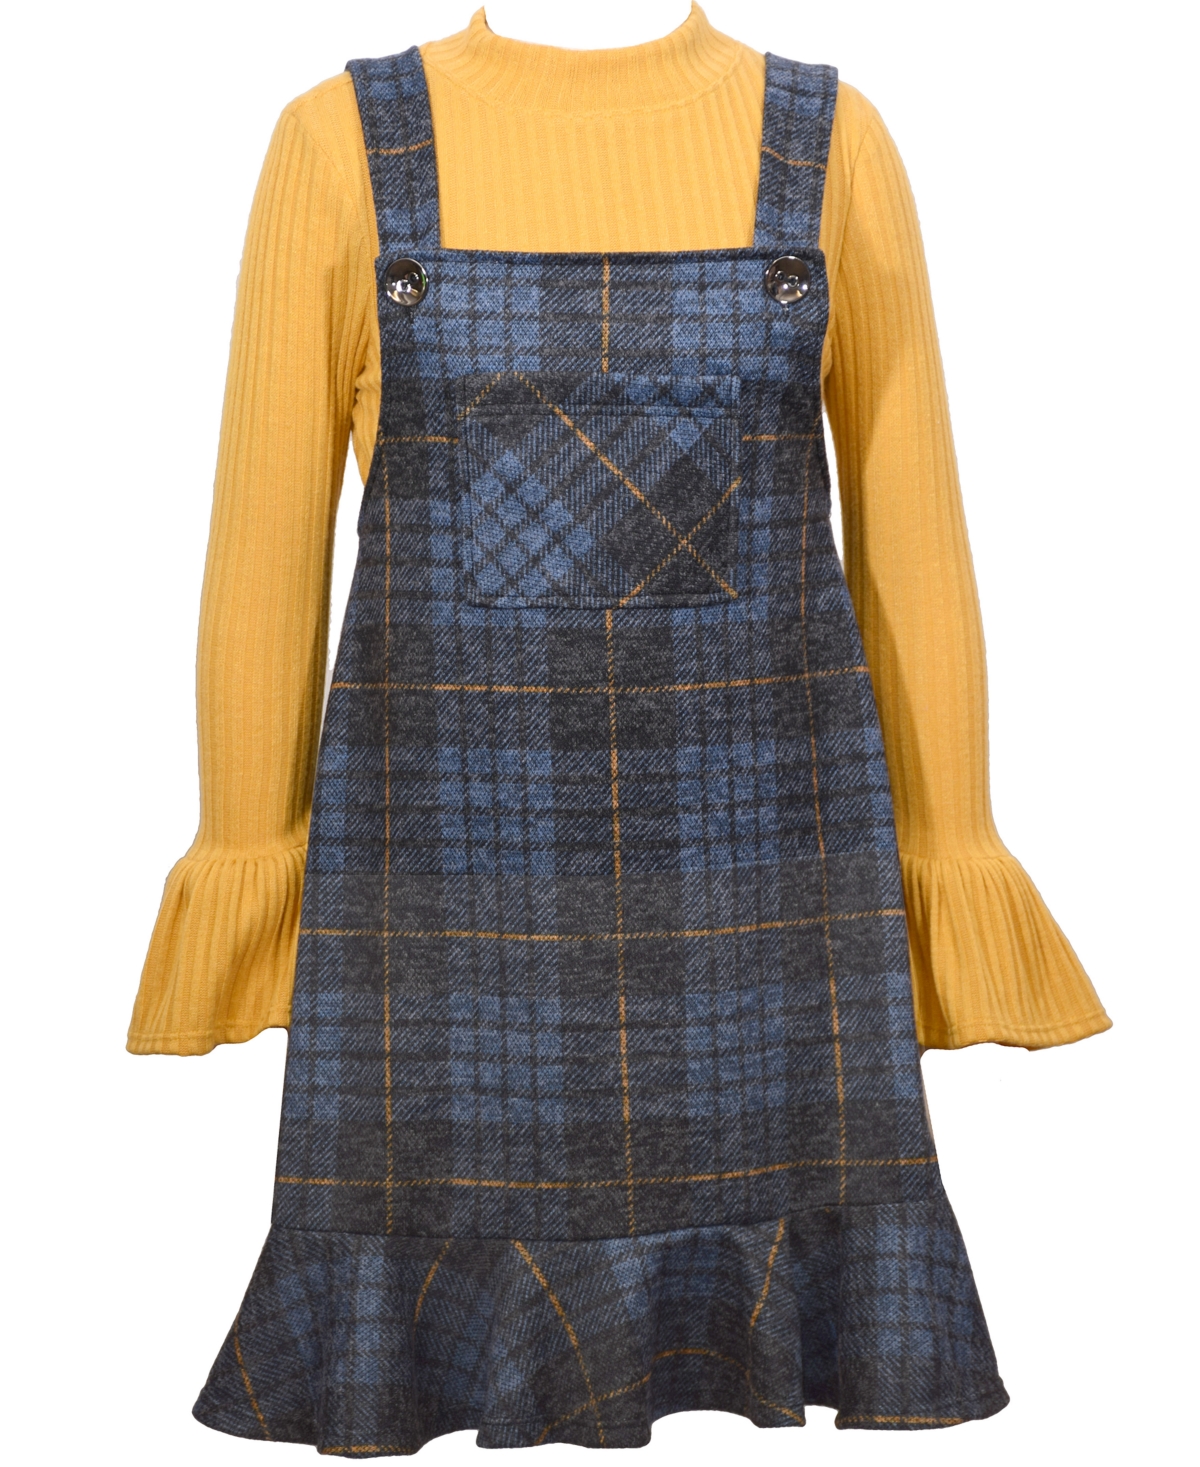 Bonnie Jean Big Girls Plaid Jacquard Knit Jumper With Flounce And Ribbed Mock Neck Shirt, 2 Piece In Mustard